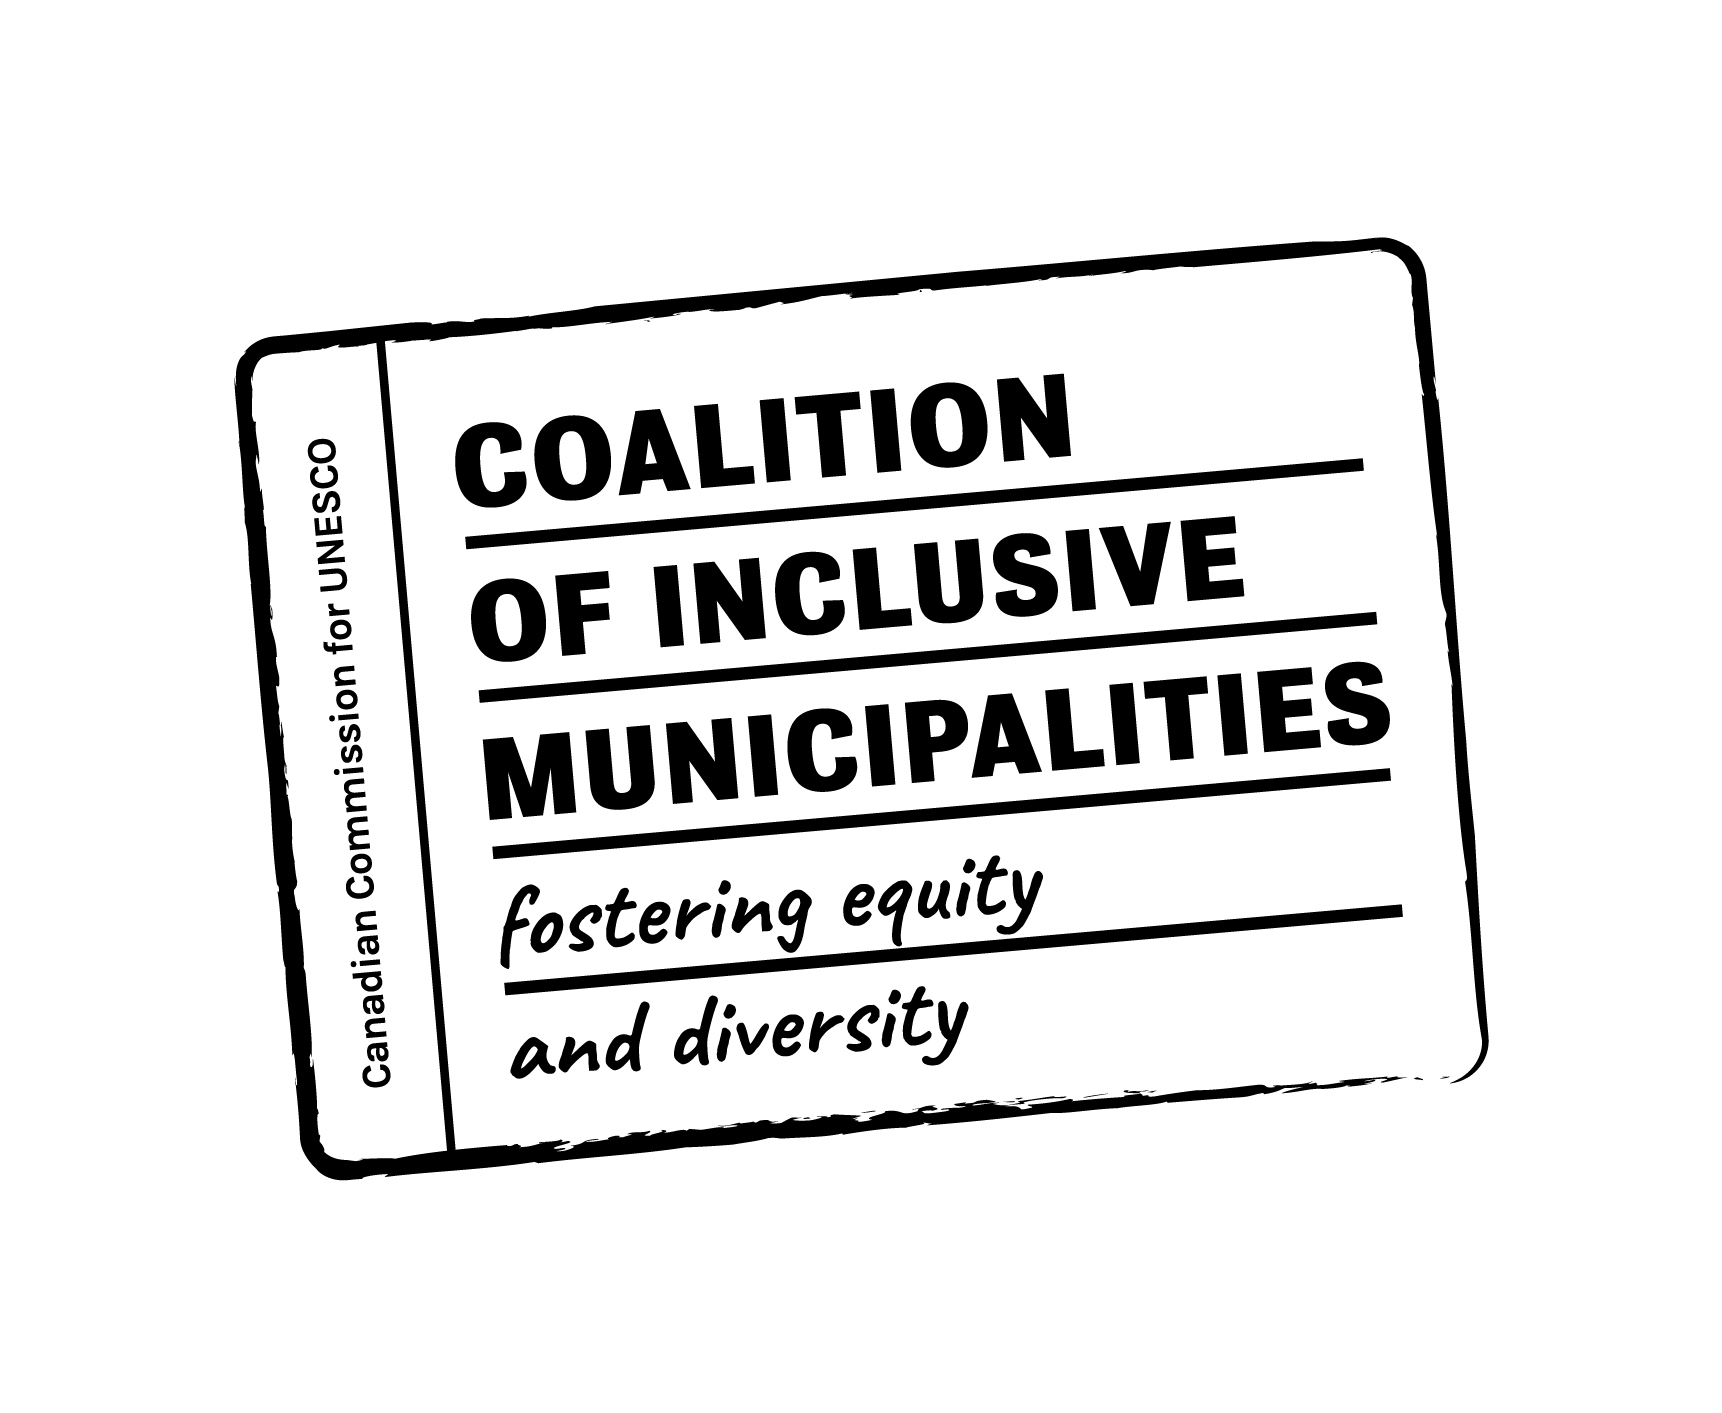 Coalition of Inclusive Municipalities logo with the words "fostering equity and diversity" included.